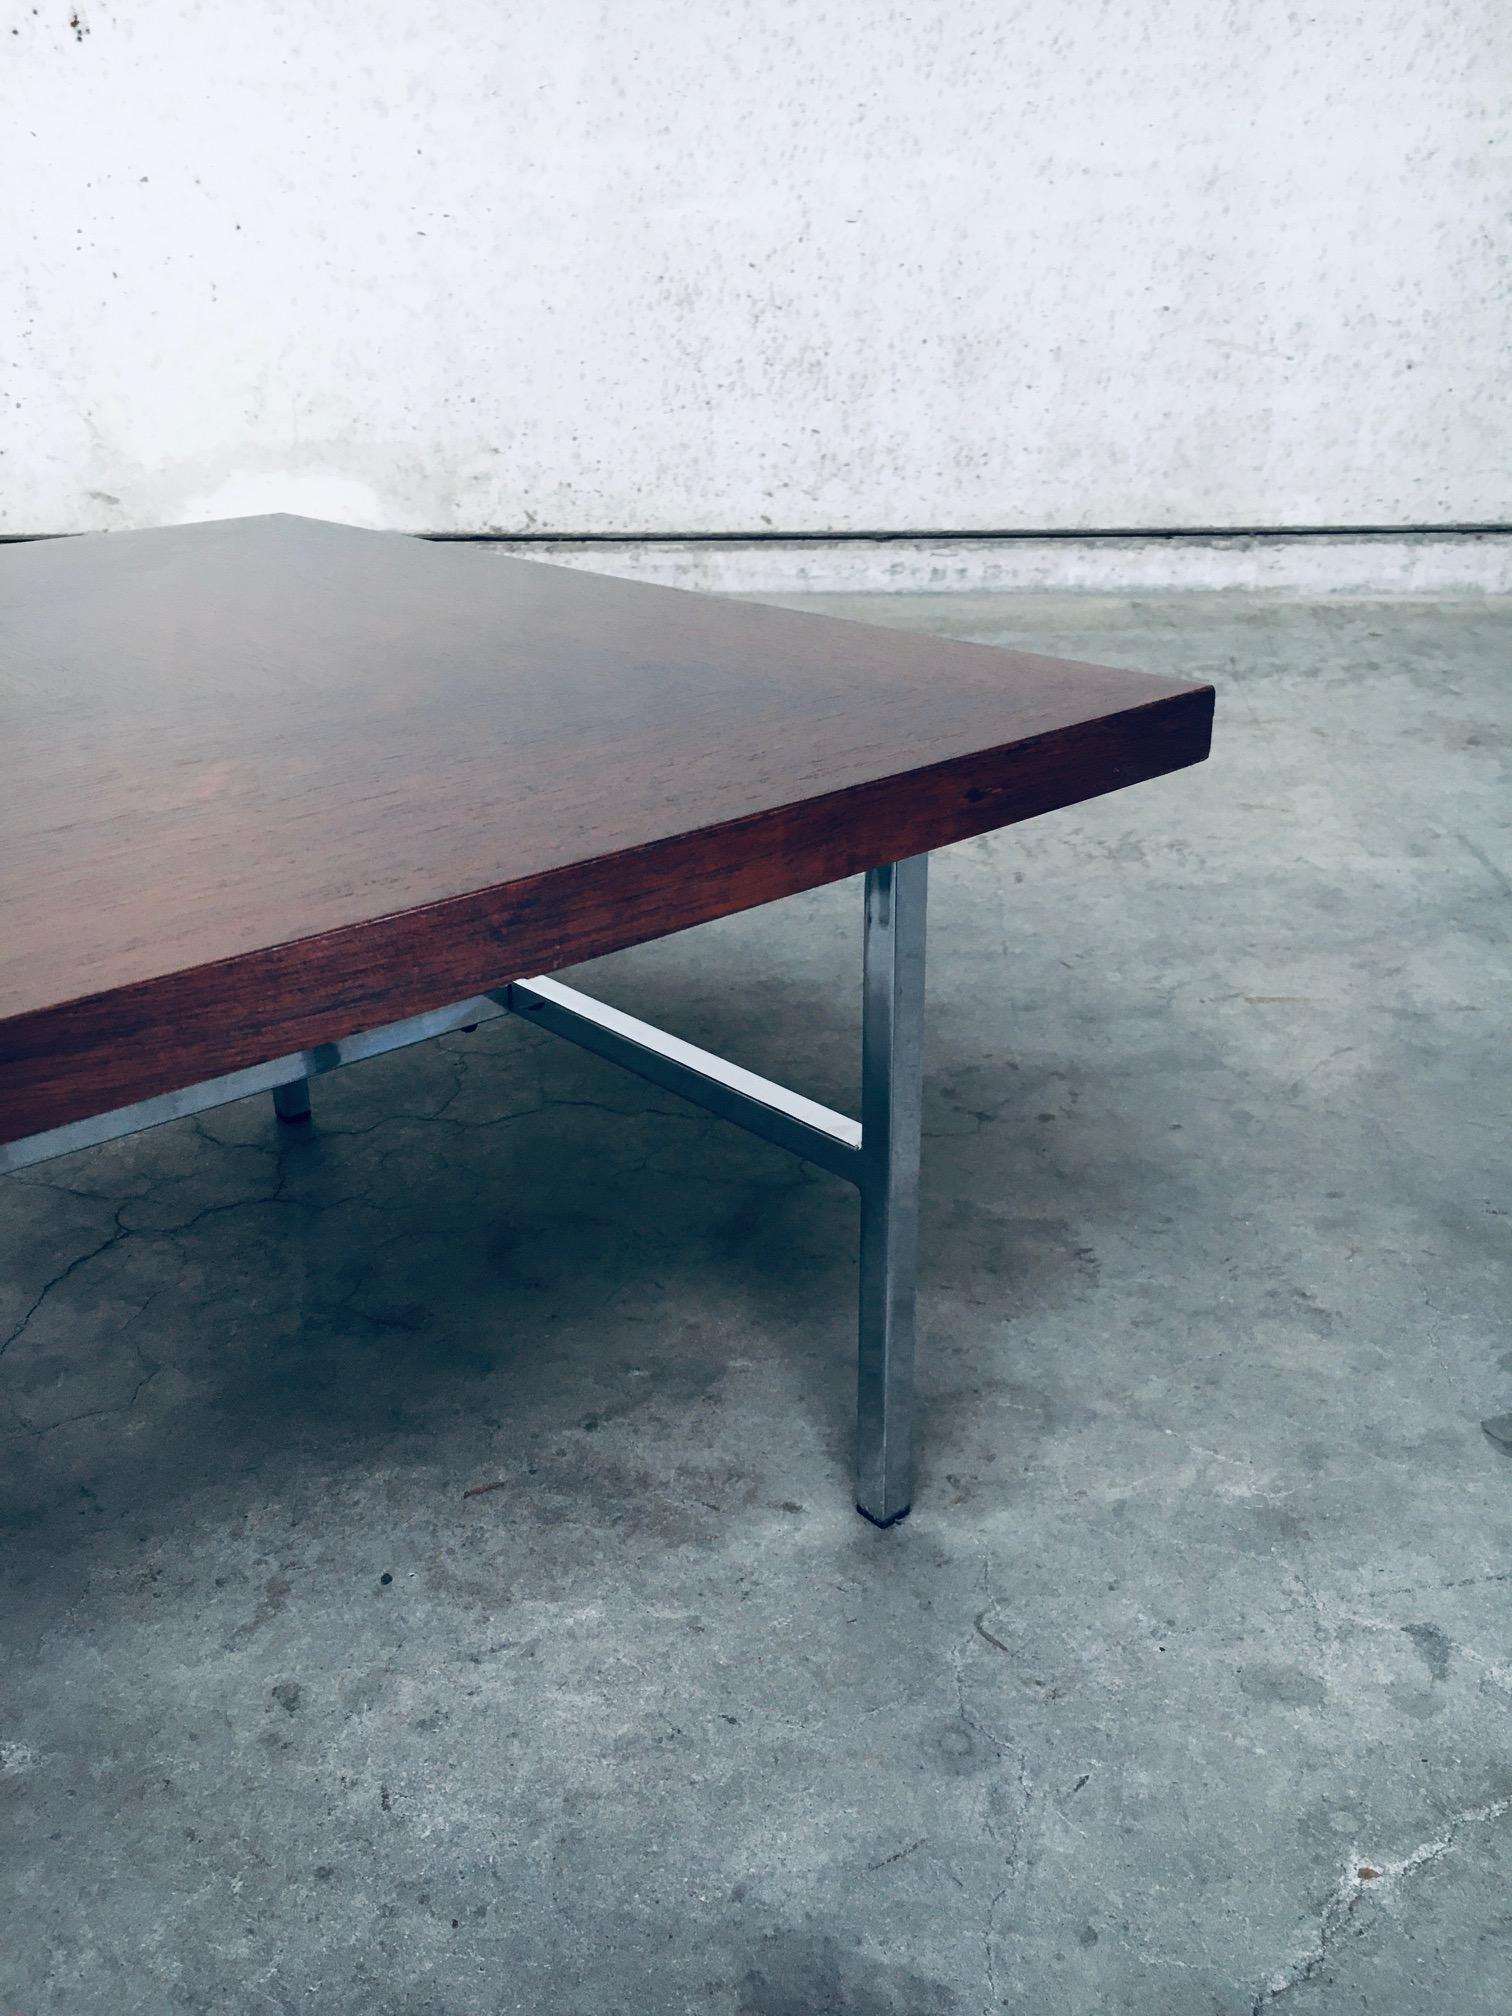 Midcentury Dutch Design Coffee Table, Netherlands 1960's For Sale 5